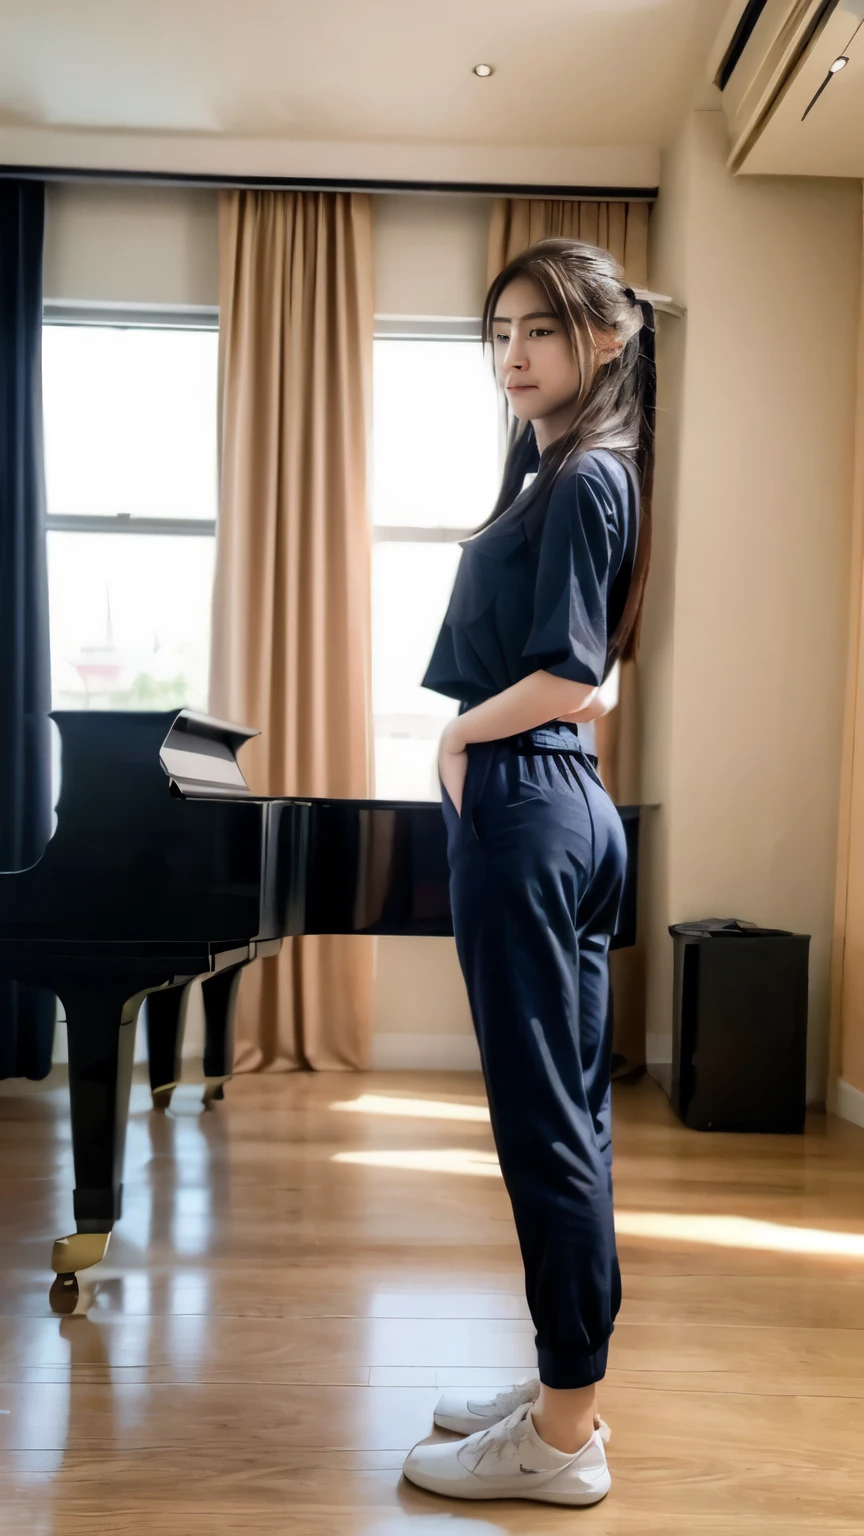 2 girls in the piano room, shirtเชิ้ตshort sleeveสีน้ําเงินกรมท่า,Navy Long Trackpant,(best quality,10,10,height,Masterpiece:1.2),very detailed,(realistic,ภาพrealistic,Realistic photos:1.37),shiny, ผิวshiny,only,A soft smile.,short sleeve,shirt, กางเกงLong legs.,Face focus,dynamic poses,from behind,Focus on the ass.,Masterpiece, best quality, ultra realistic, very detailedเกินไป, 8k resolution, raw photos, Sharp focus, ((Navy blue shirt:1.1)), short sleeve, long path, perfect bodyแบบ, 2 mature women, 18 years old, Cinema-grade lighting system,กางเกงLong legsวอร์ม,shirtผ้าออกกำลังกาย,correct anatomy,perfect body, correct body, Sharp face, correct bodyทางกายวิภาค, full body, realistic gestures, long hair, realistic ,Long legs,fit,carved girl, Slender figure, model, fit, beautiful body,Sweatpantsสีน้ําเงิน, Sweatpants